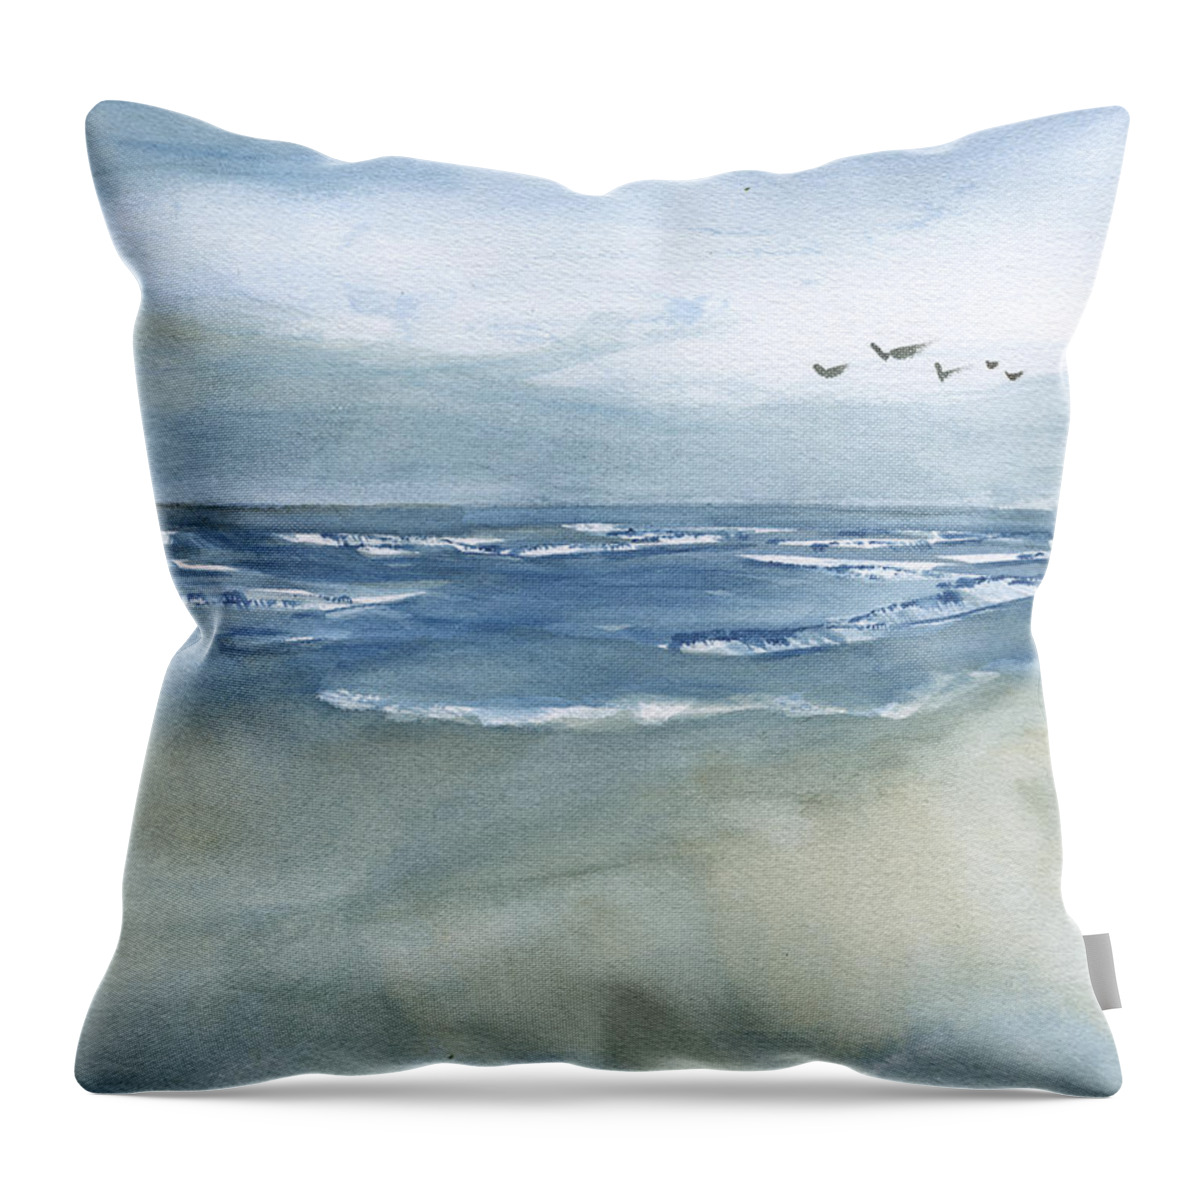 Beach Blue Throw Pillow featuring the painting Beach Blue by Frank Bright